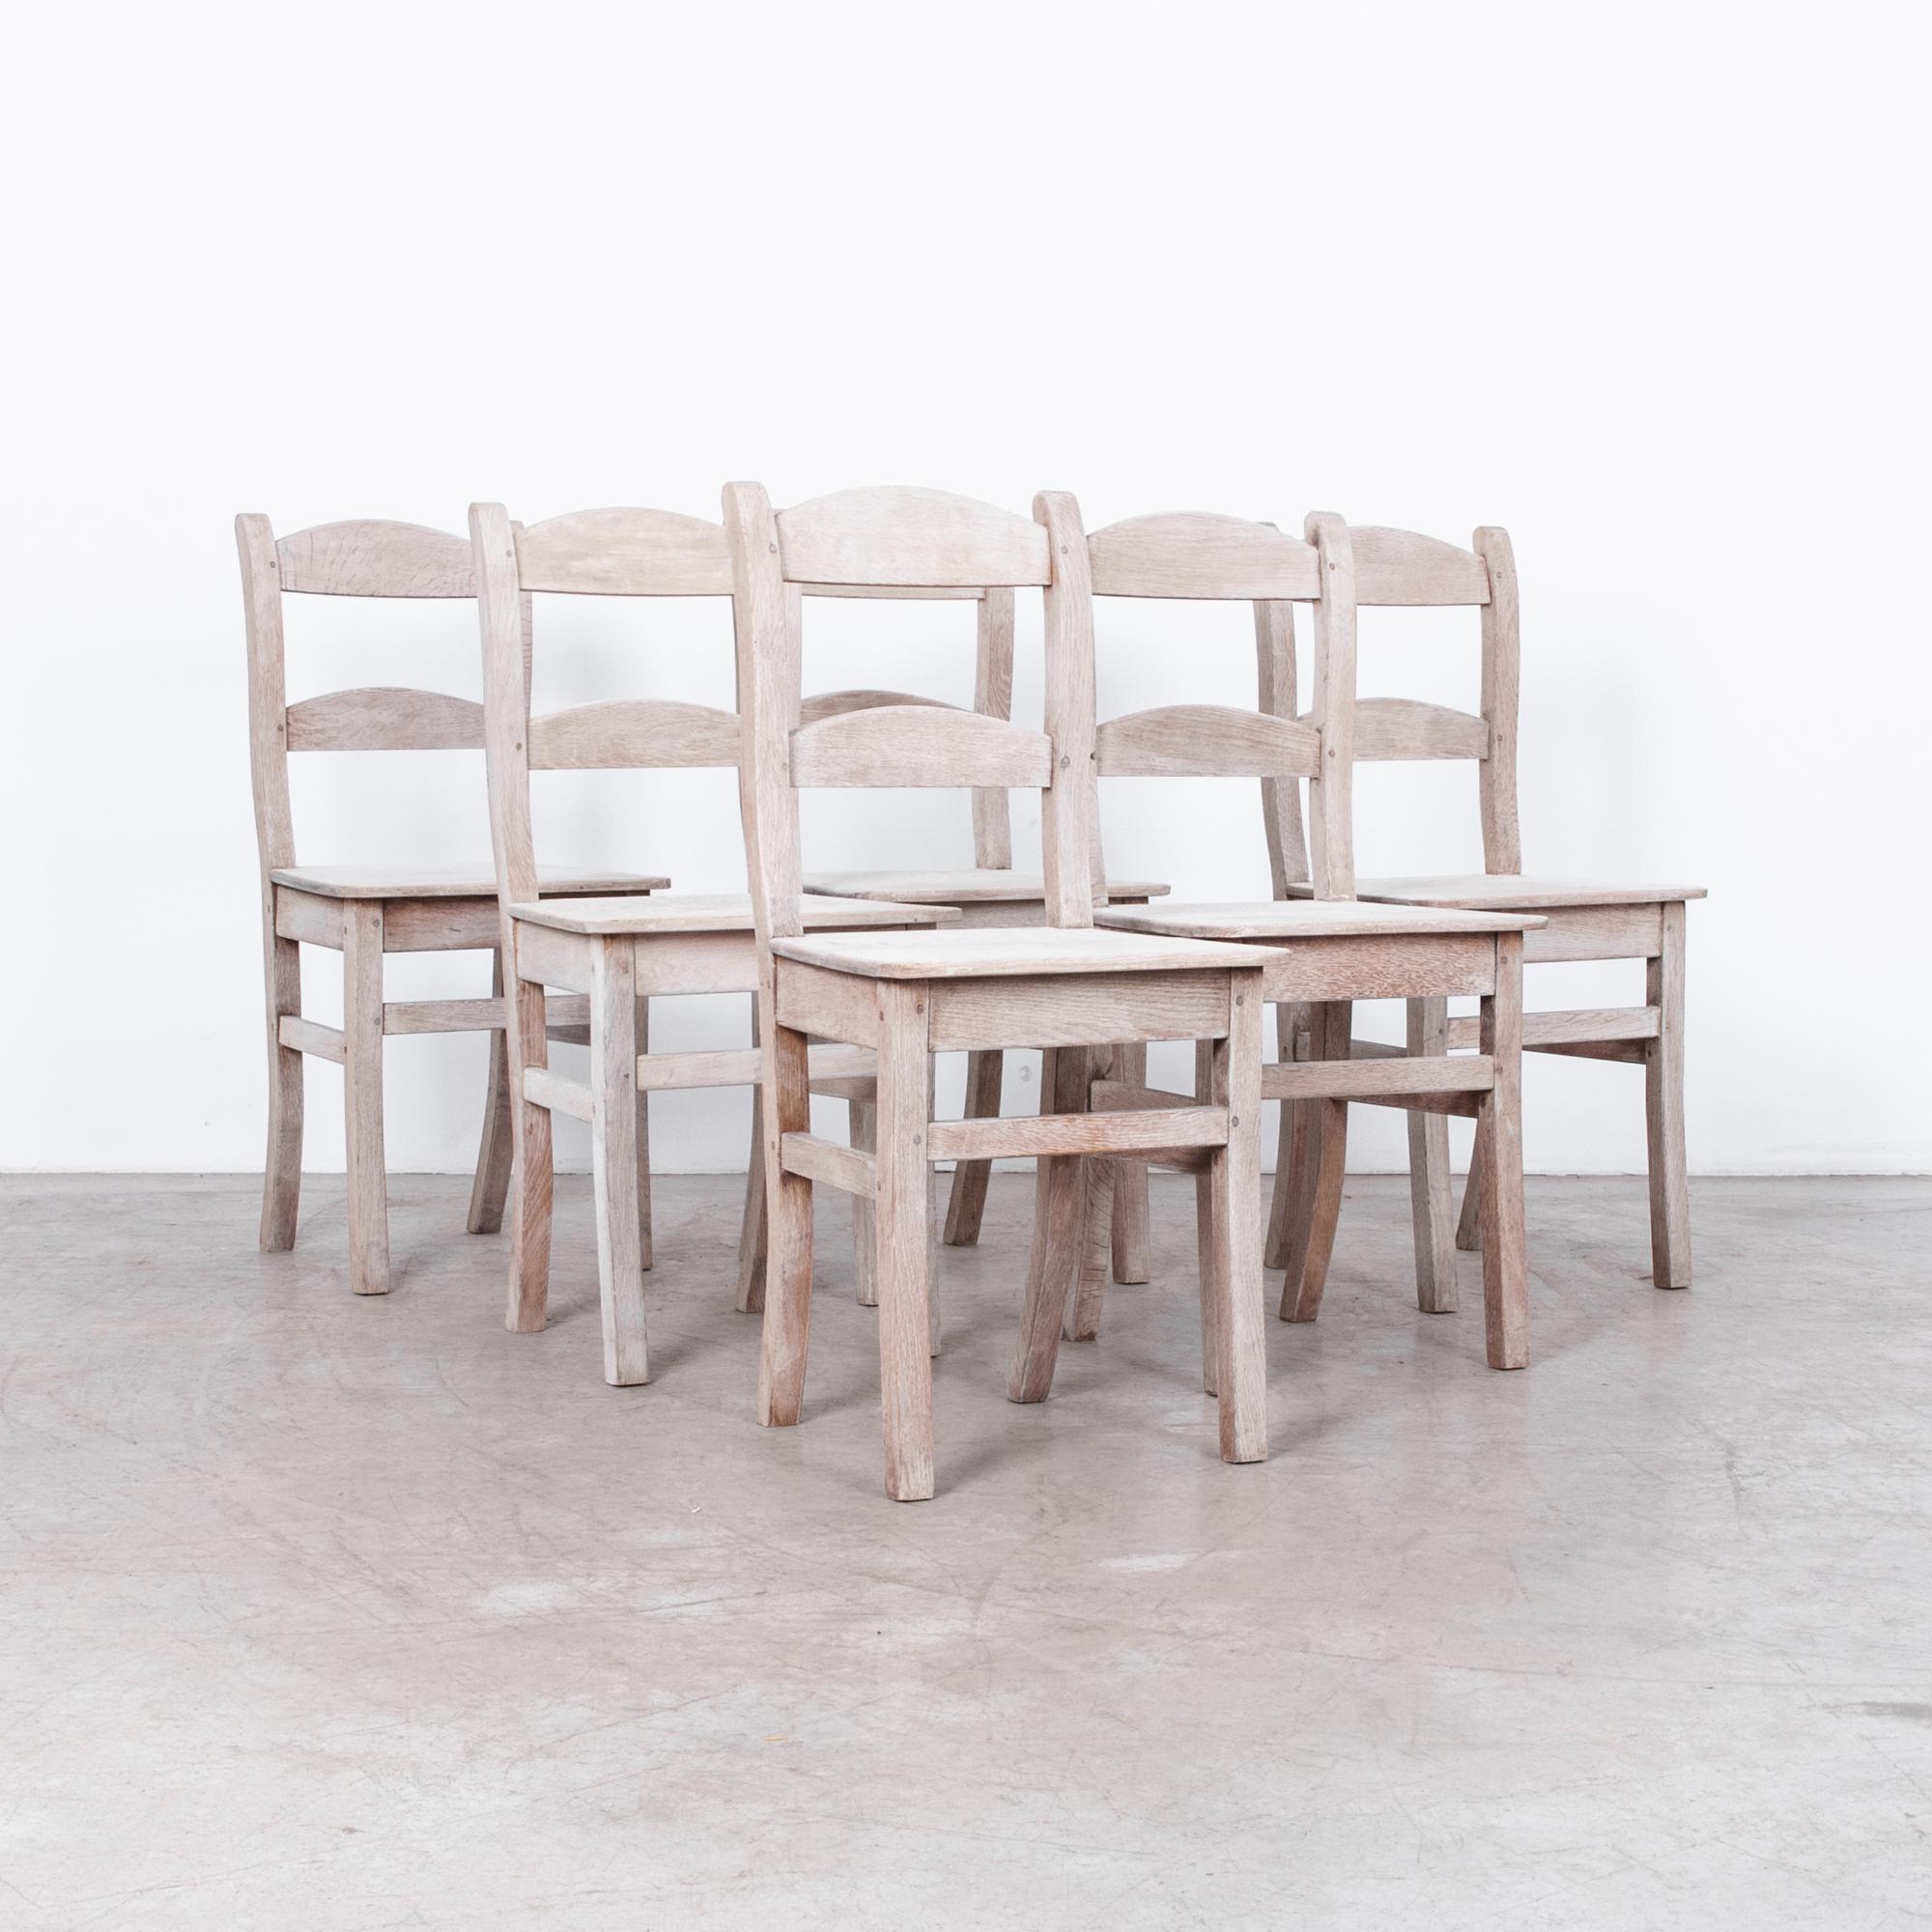 Introducing a timeless addition to your dining space: the Set of 6 1900s Belgian Bleached Oak Dining Chairs. Crafted with a sleek frame and adorned entirely in bleached oak, these chairs exude understated elegance and charm. Their straight seat